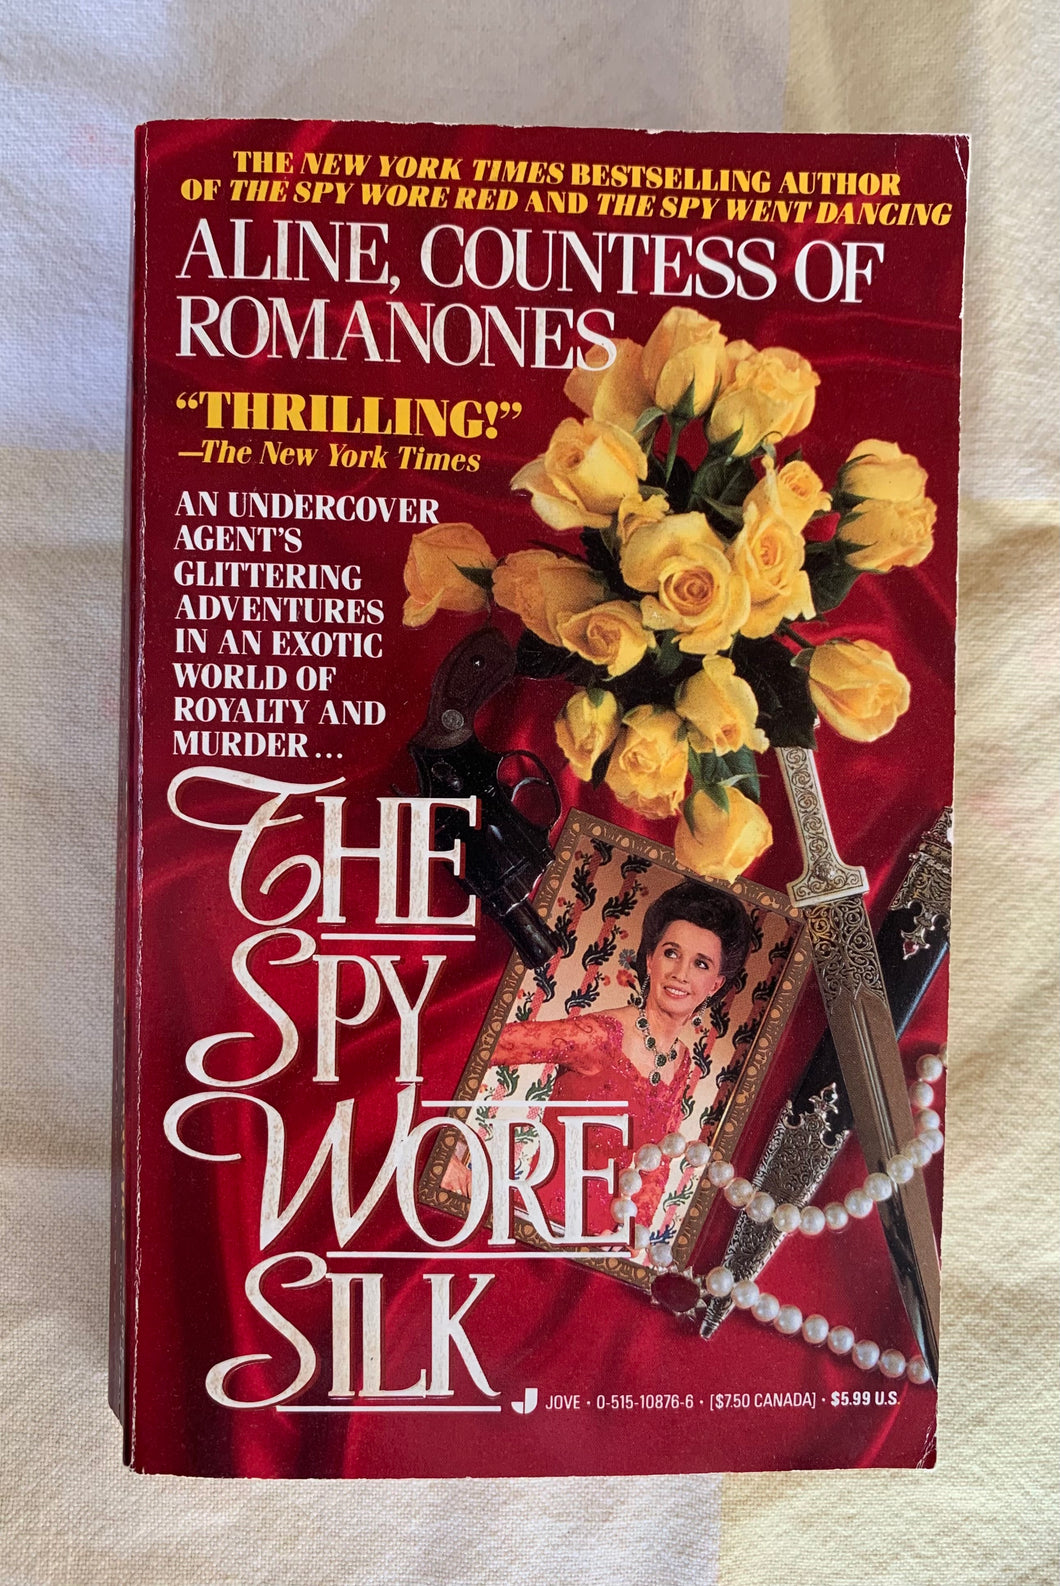 The Spy Wore Silk: An Undercover Agent's Glittering Adventures in an Exotic World of Royalty and Murder...